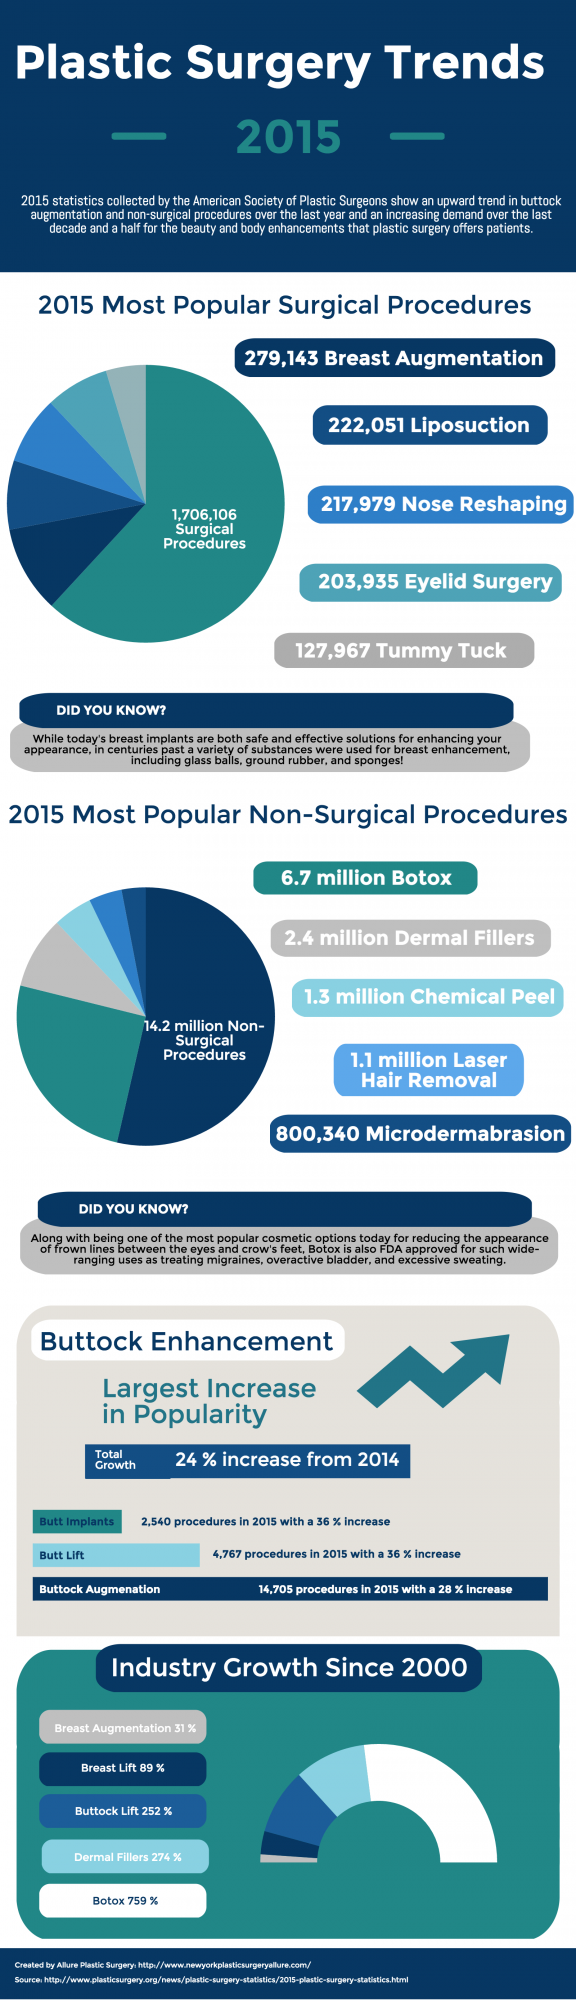 Allure Plastic Surgery Blog | Infographic: Plastic Surgery Trends for 2015